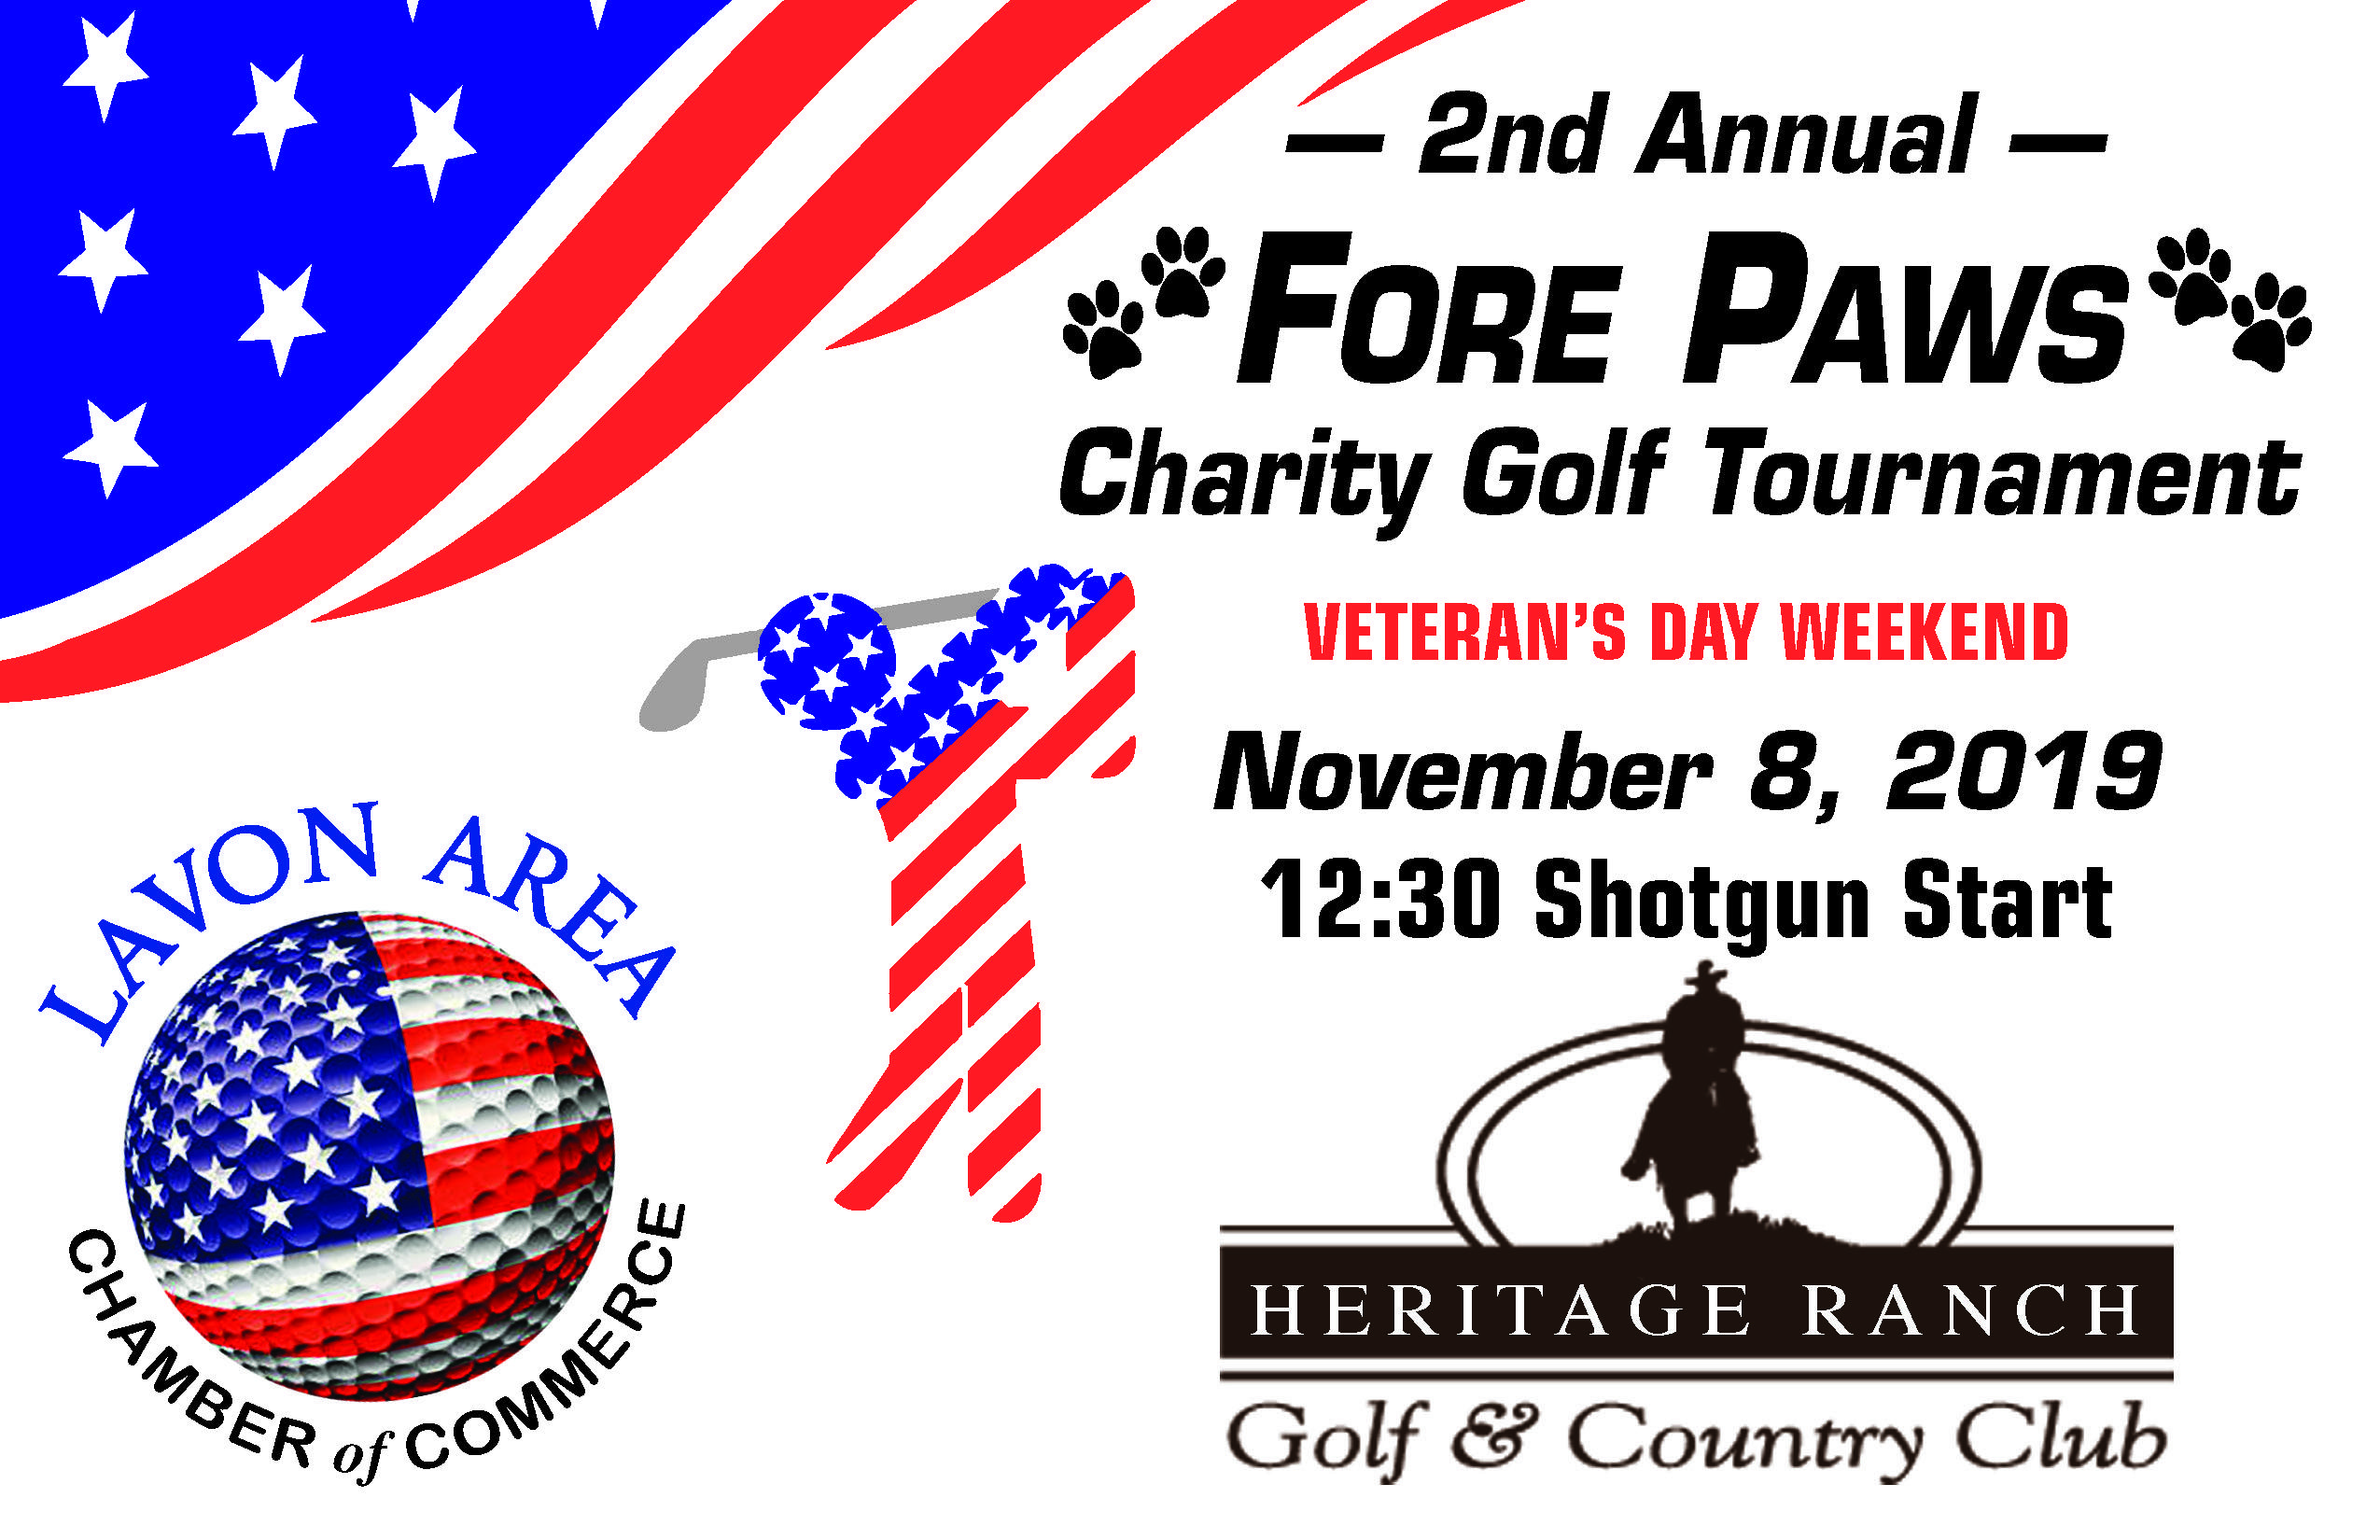 2nd Annual Lavon Area Chamber Fore Paws Charity Golf Tournament